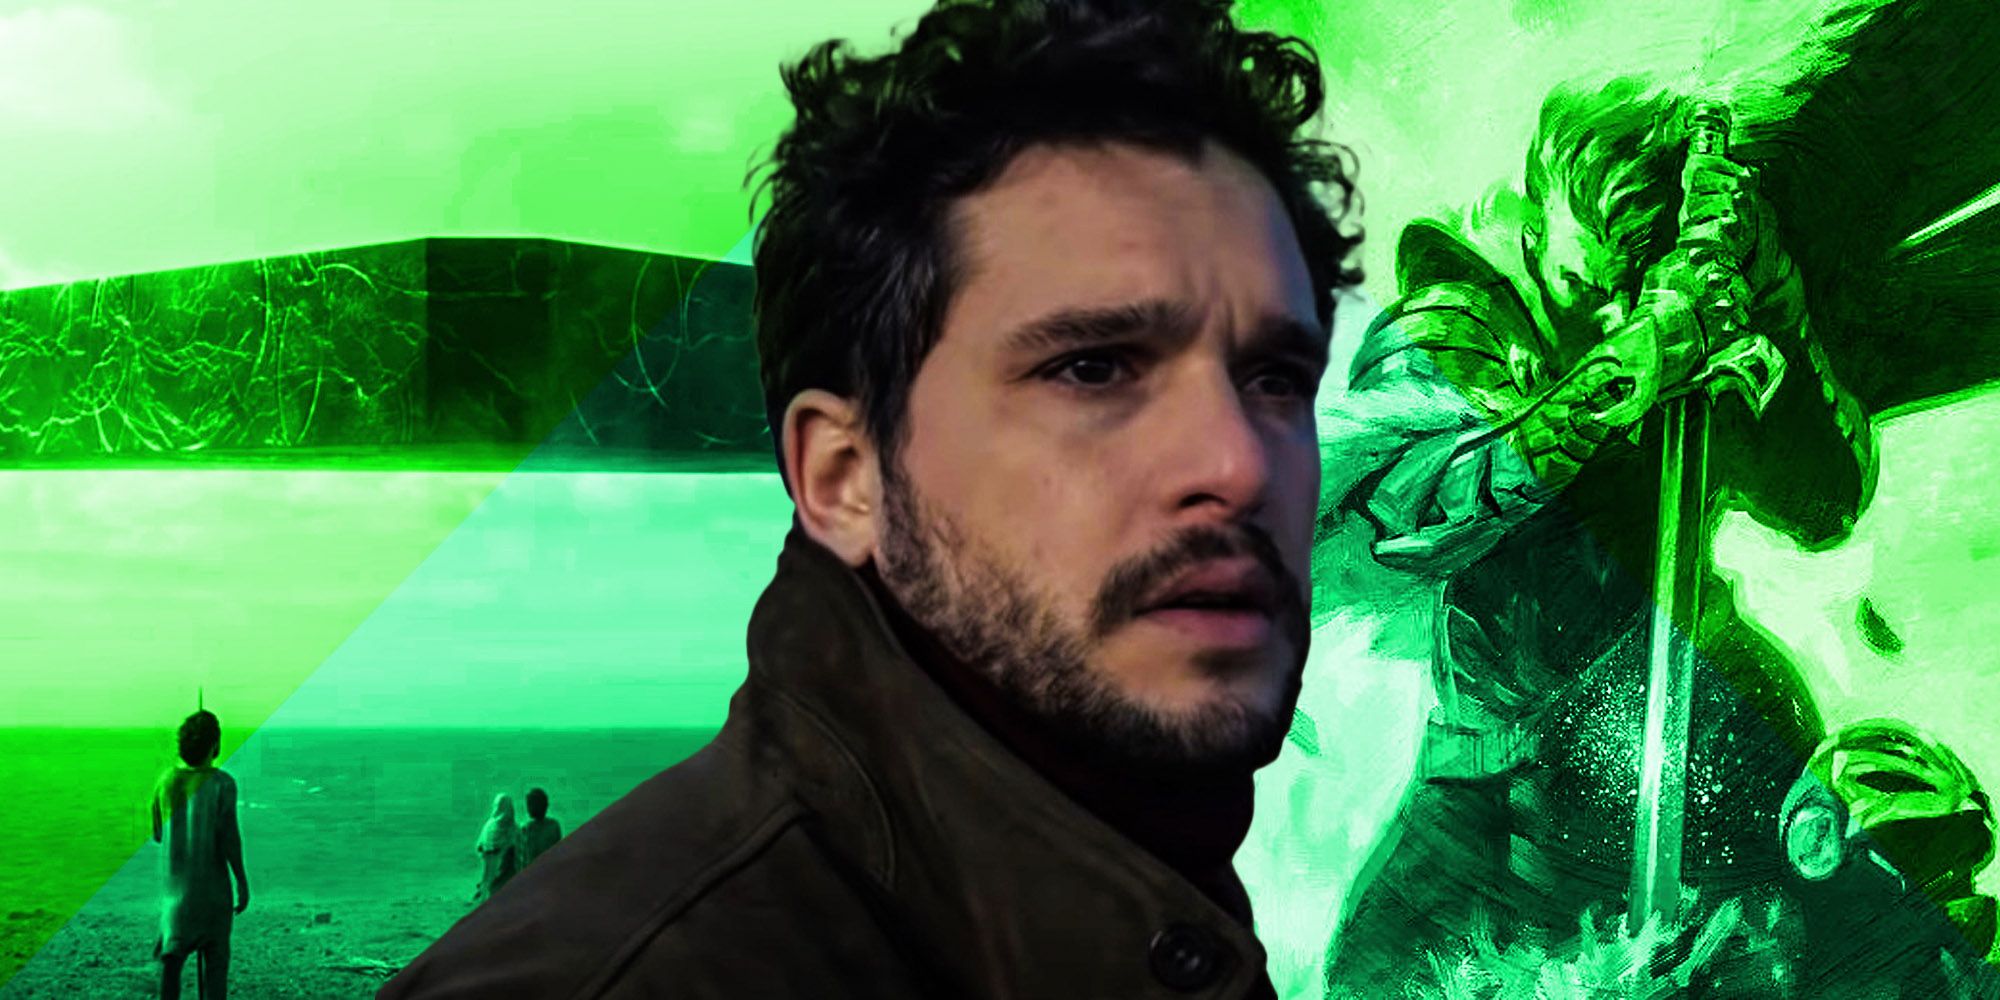 A blended image features kit Harrington as Dane Whitman in the foreground and a green tinged background of the Eternals arriving on Earth in the MCU and the Black Knight getting his sword in Marvel Comics